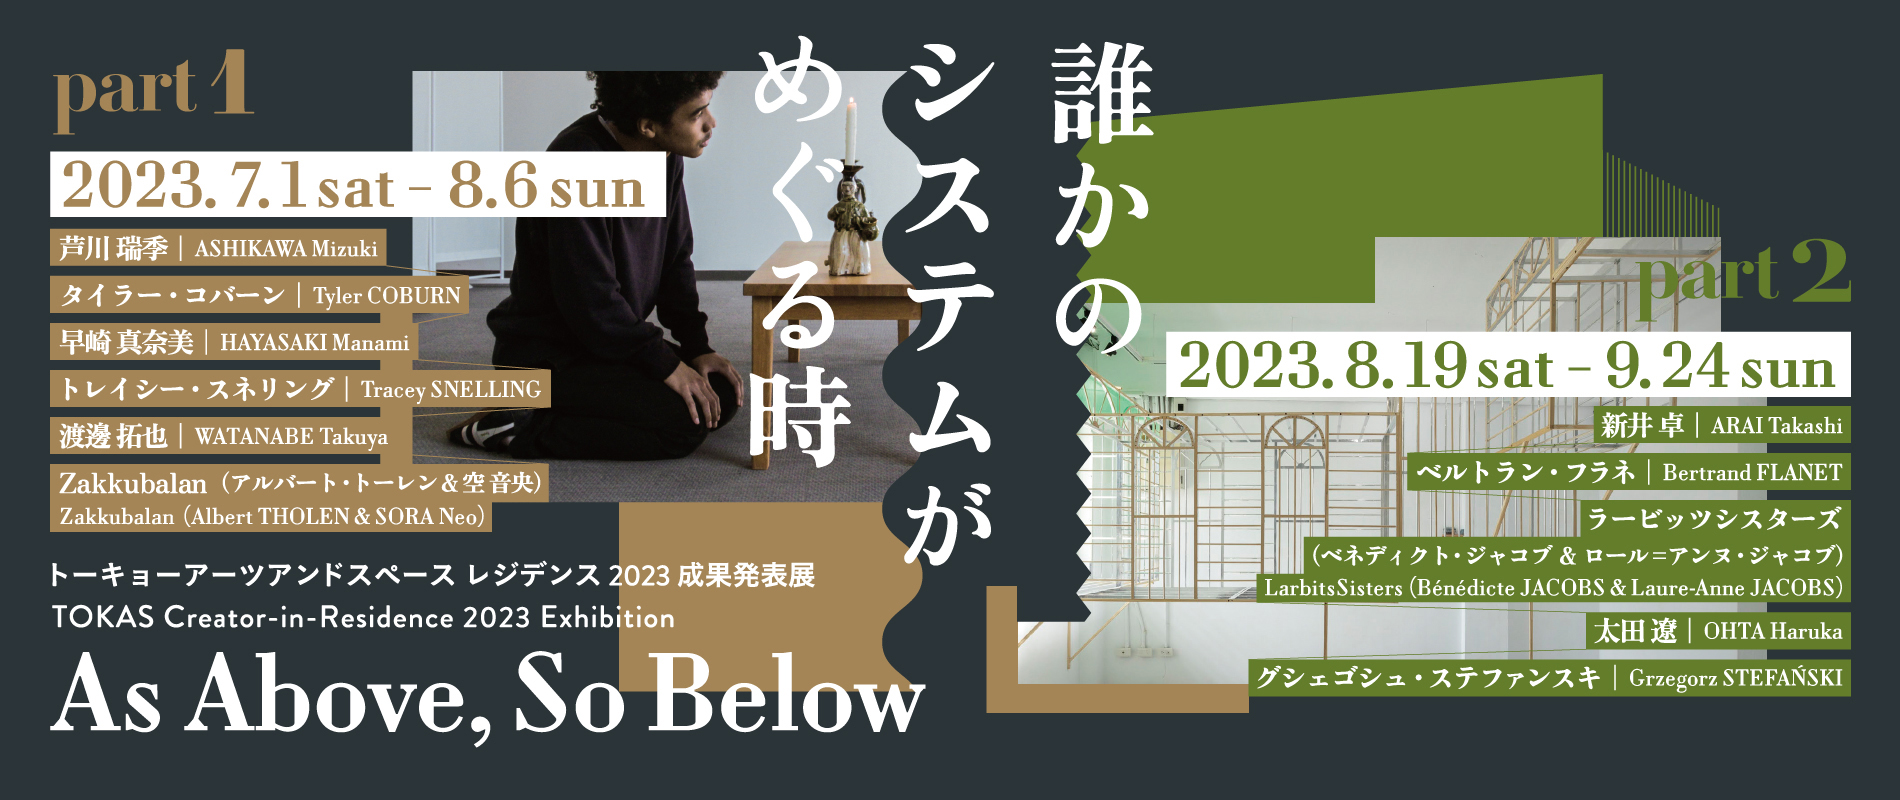 TOKAS Creator-in-Residence 2023 Exhibition “As Above, So Below”